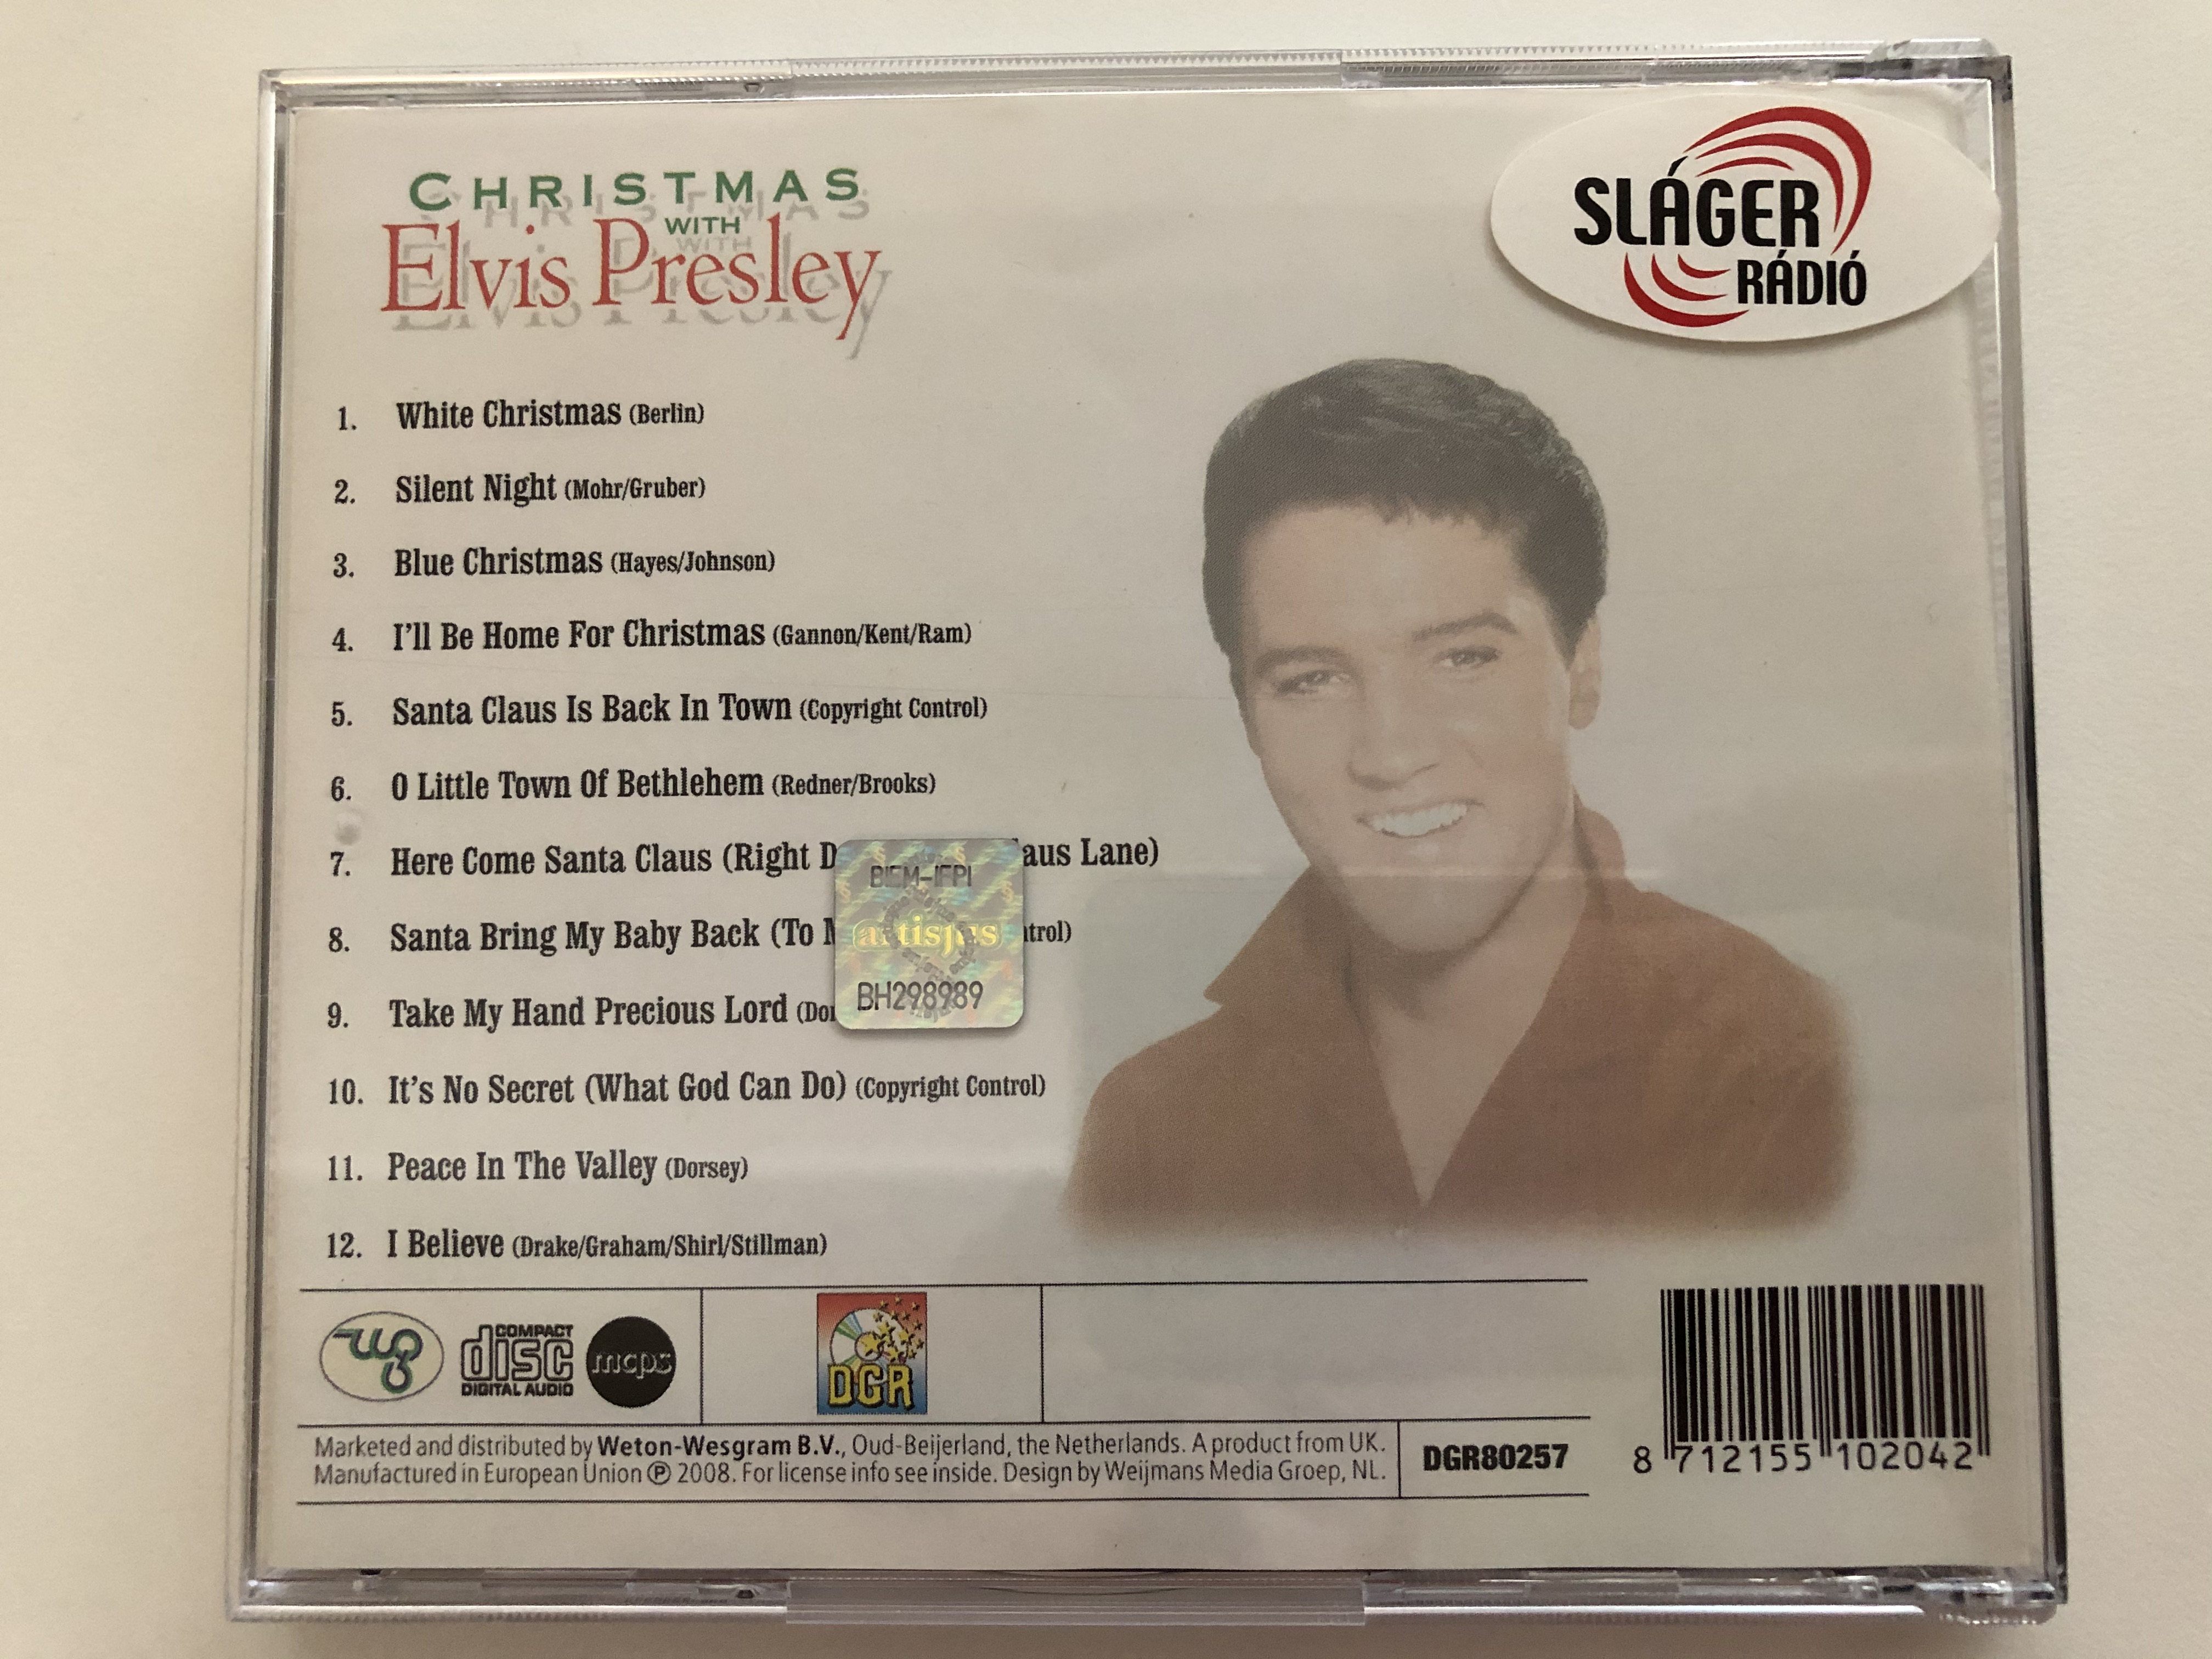 christmas-with-elvis-presley-white-christmas-silent-night-i-ll-be-home-for-christmas-santa-claus-is-back-in-town-blue-christmas-weton-wesgram-audio-cd-2008-dgr80257-3-.jpg